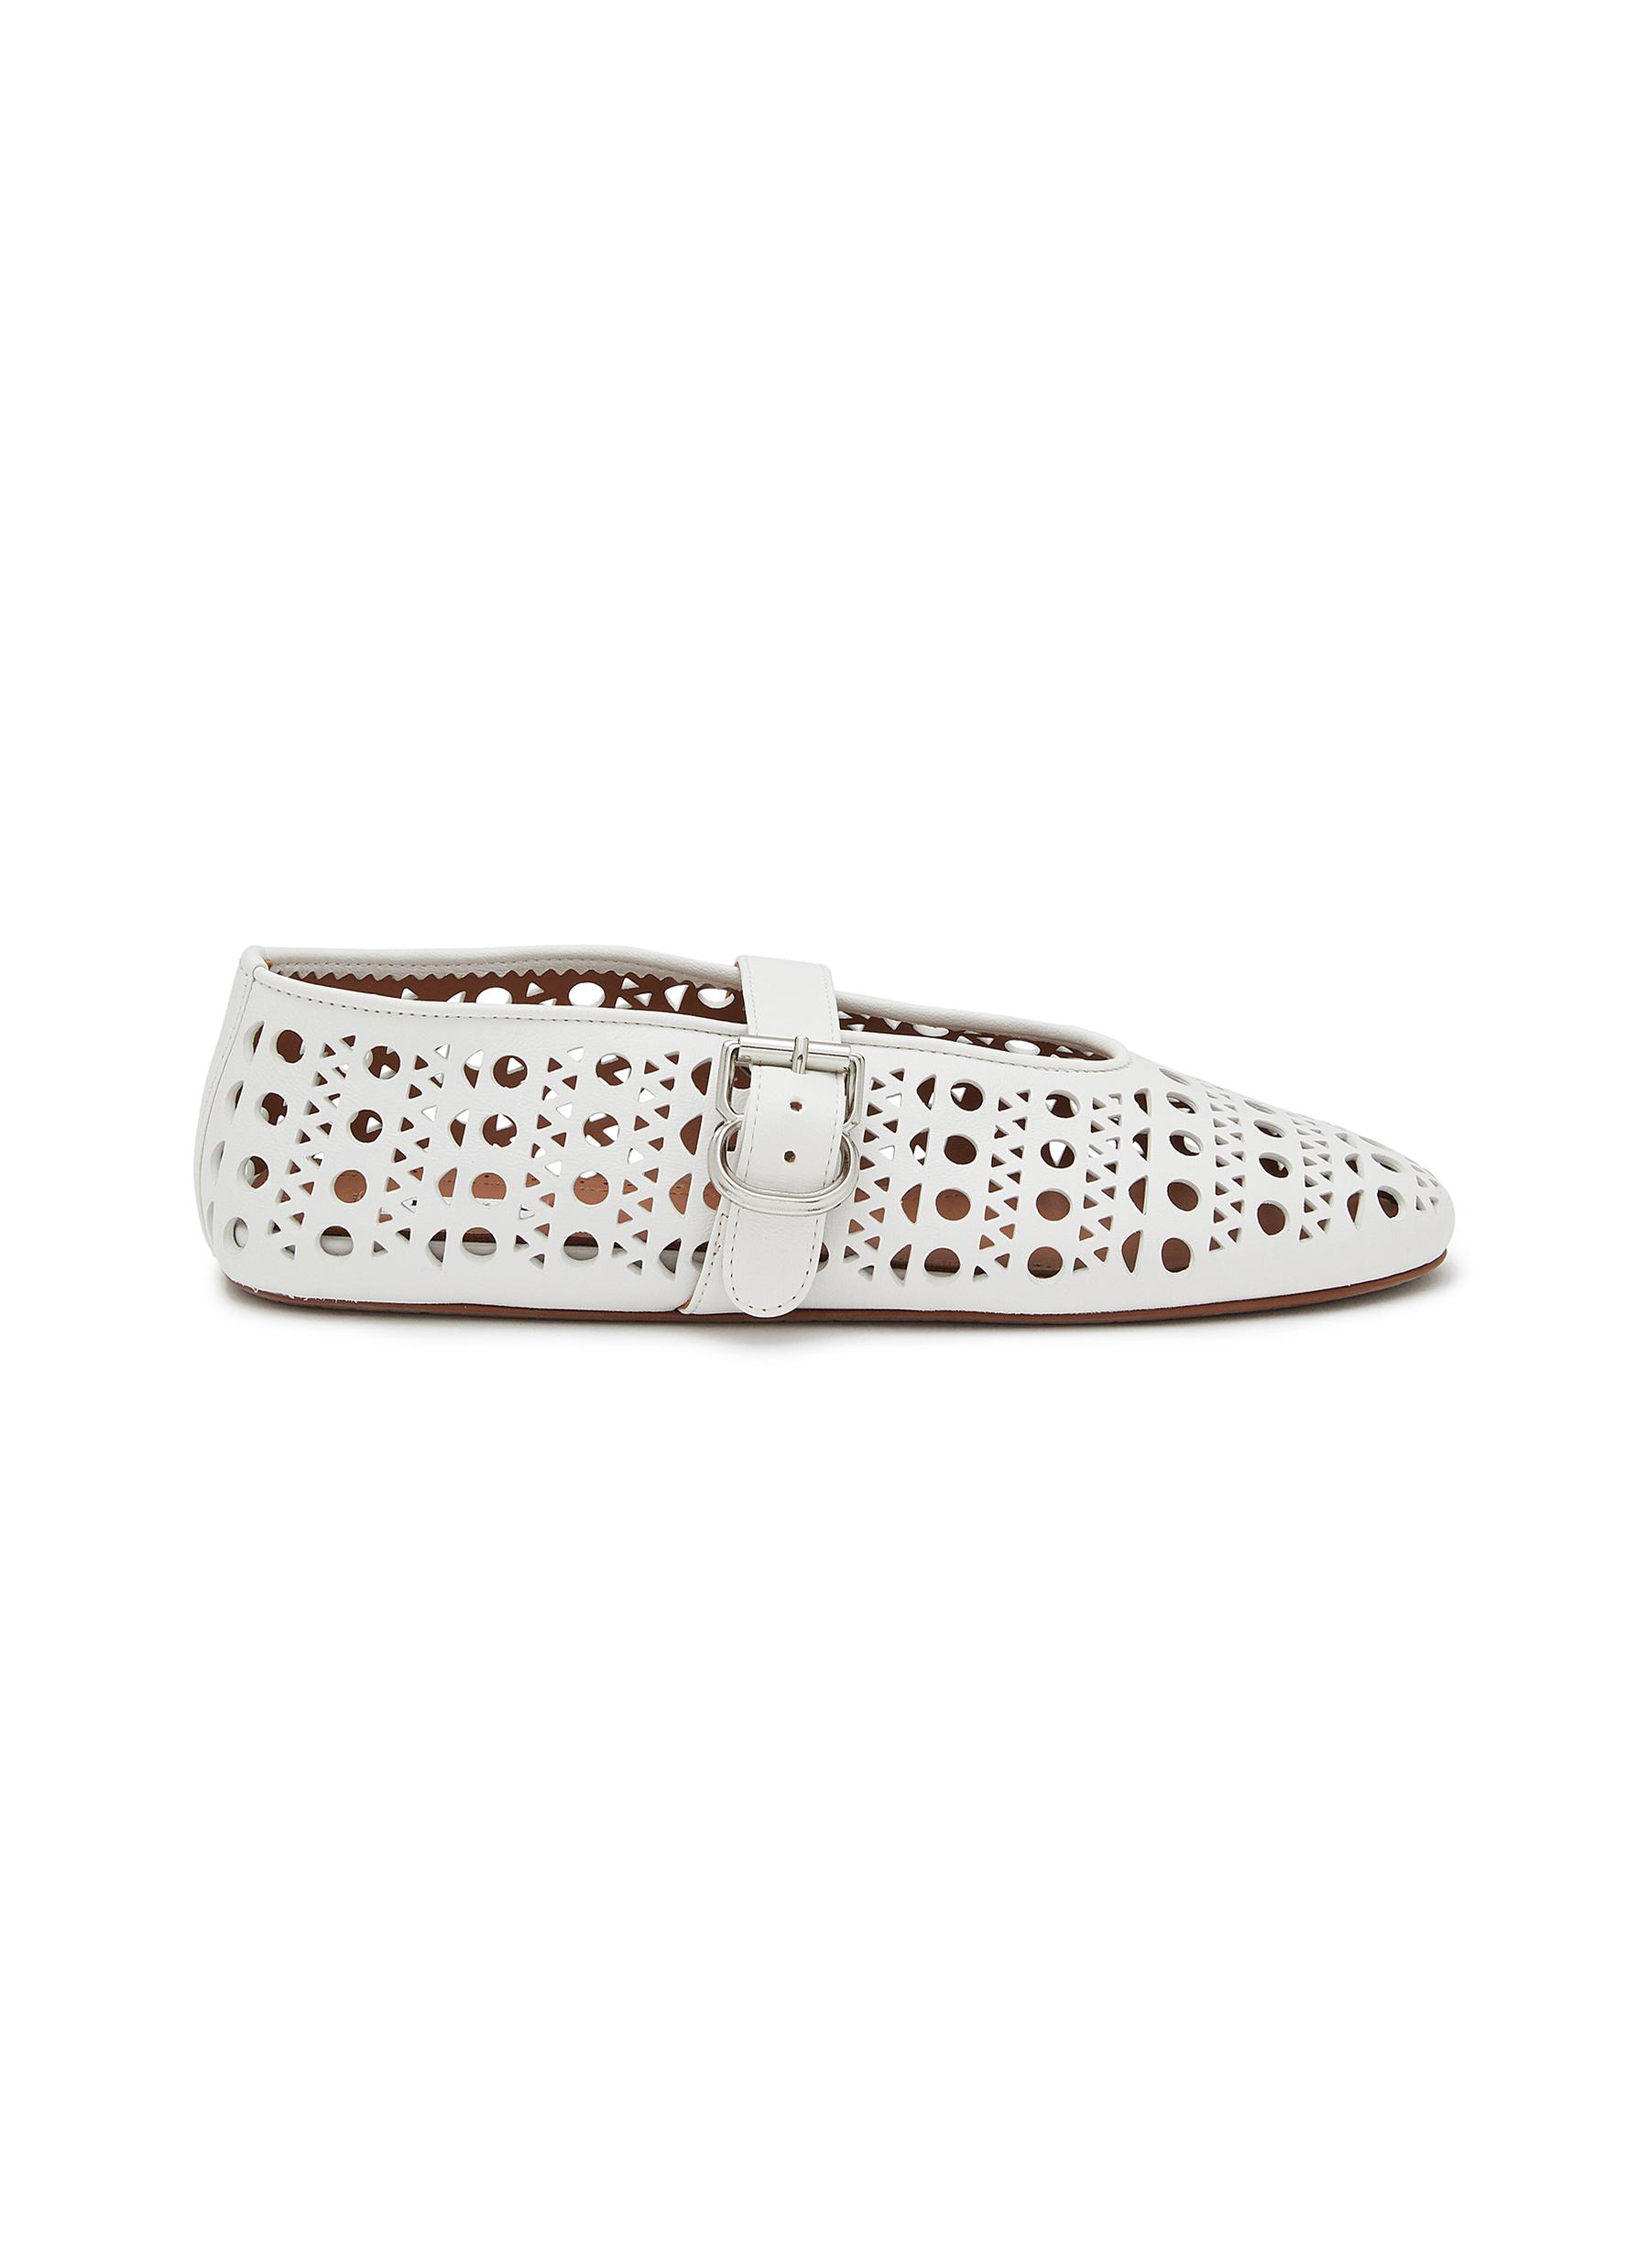 Vienne Perforated Leather Ballerina Flats